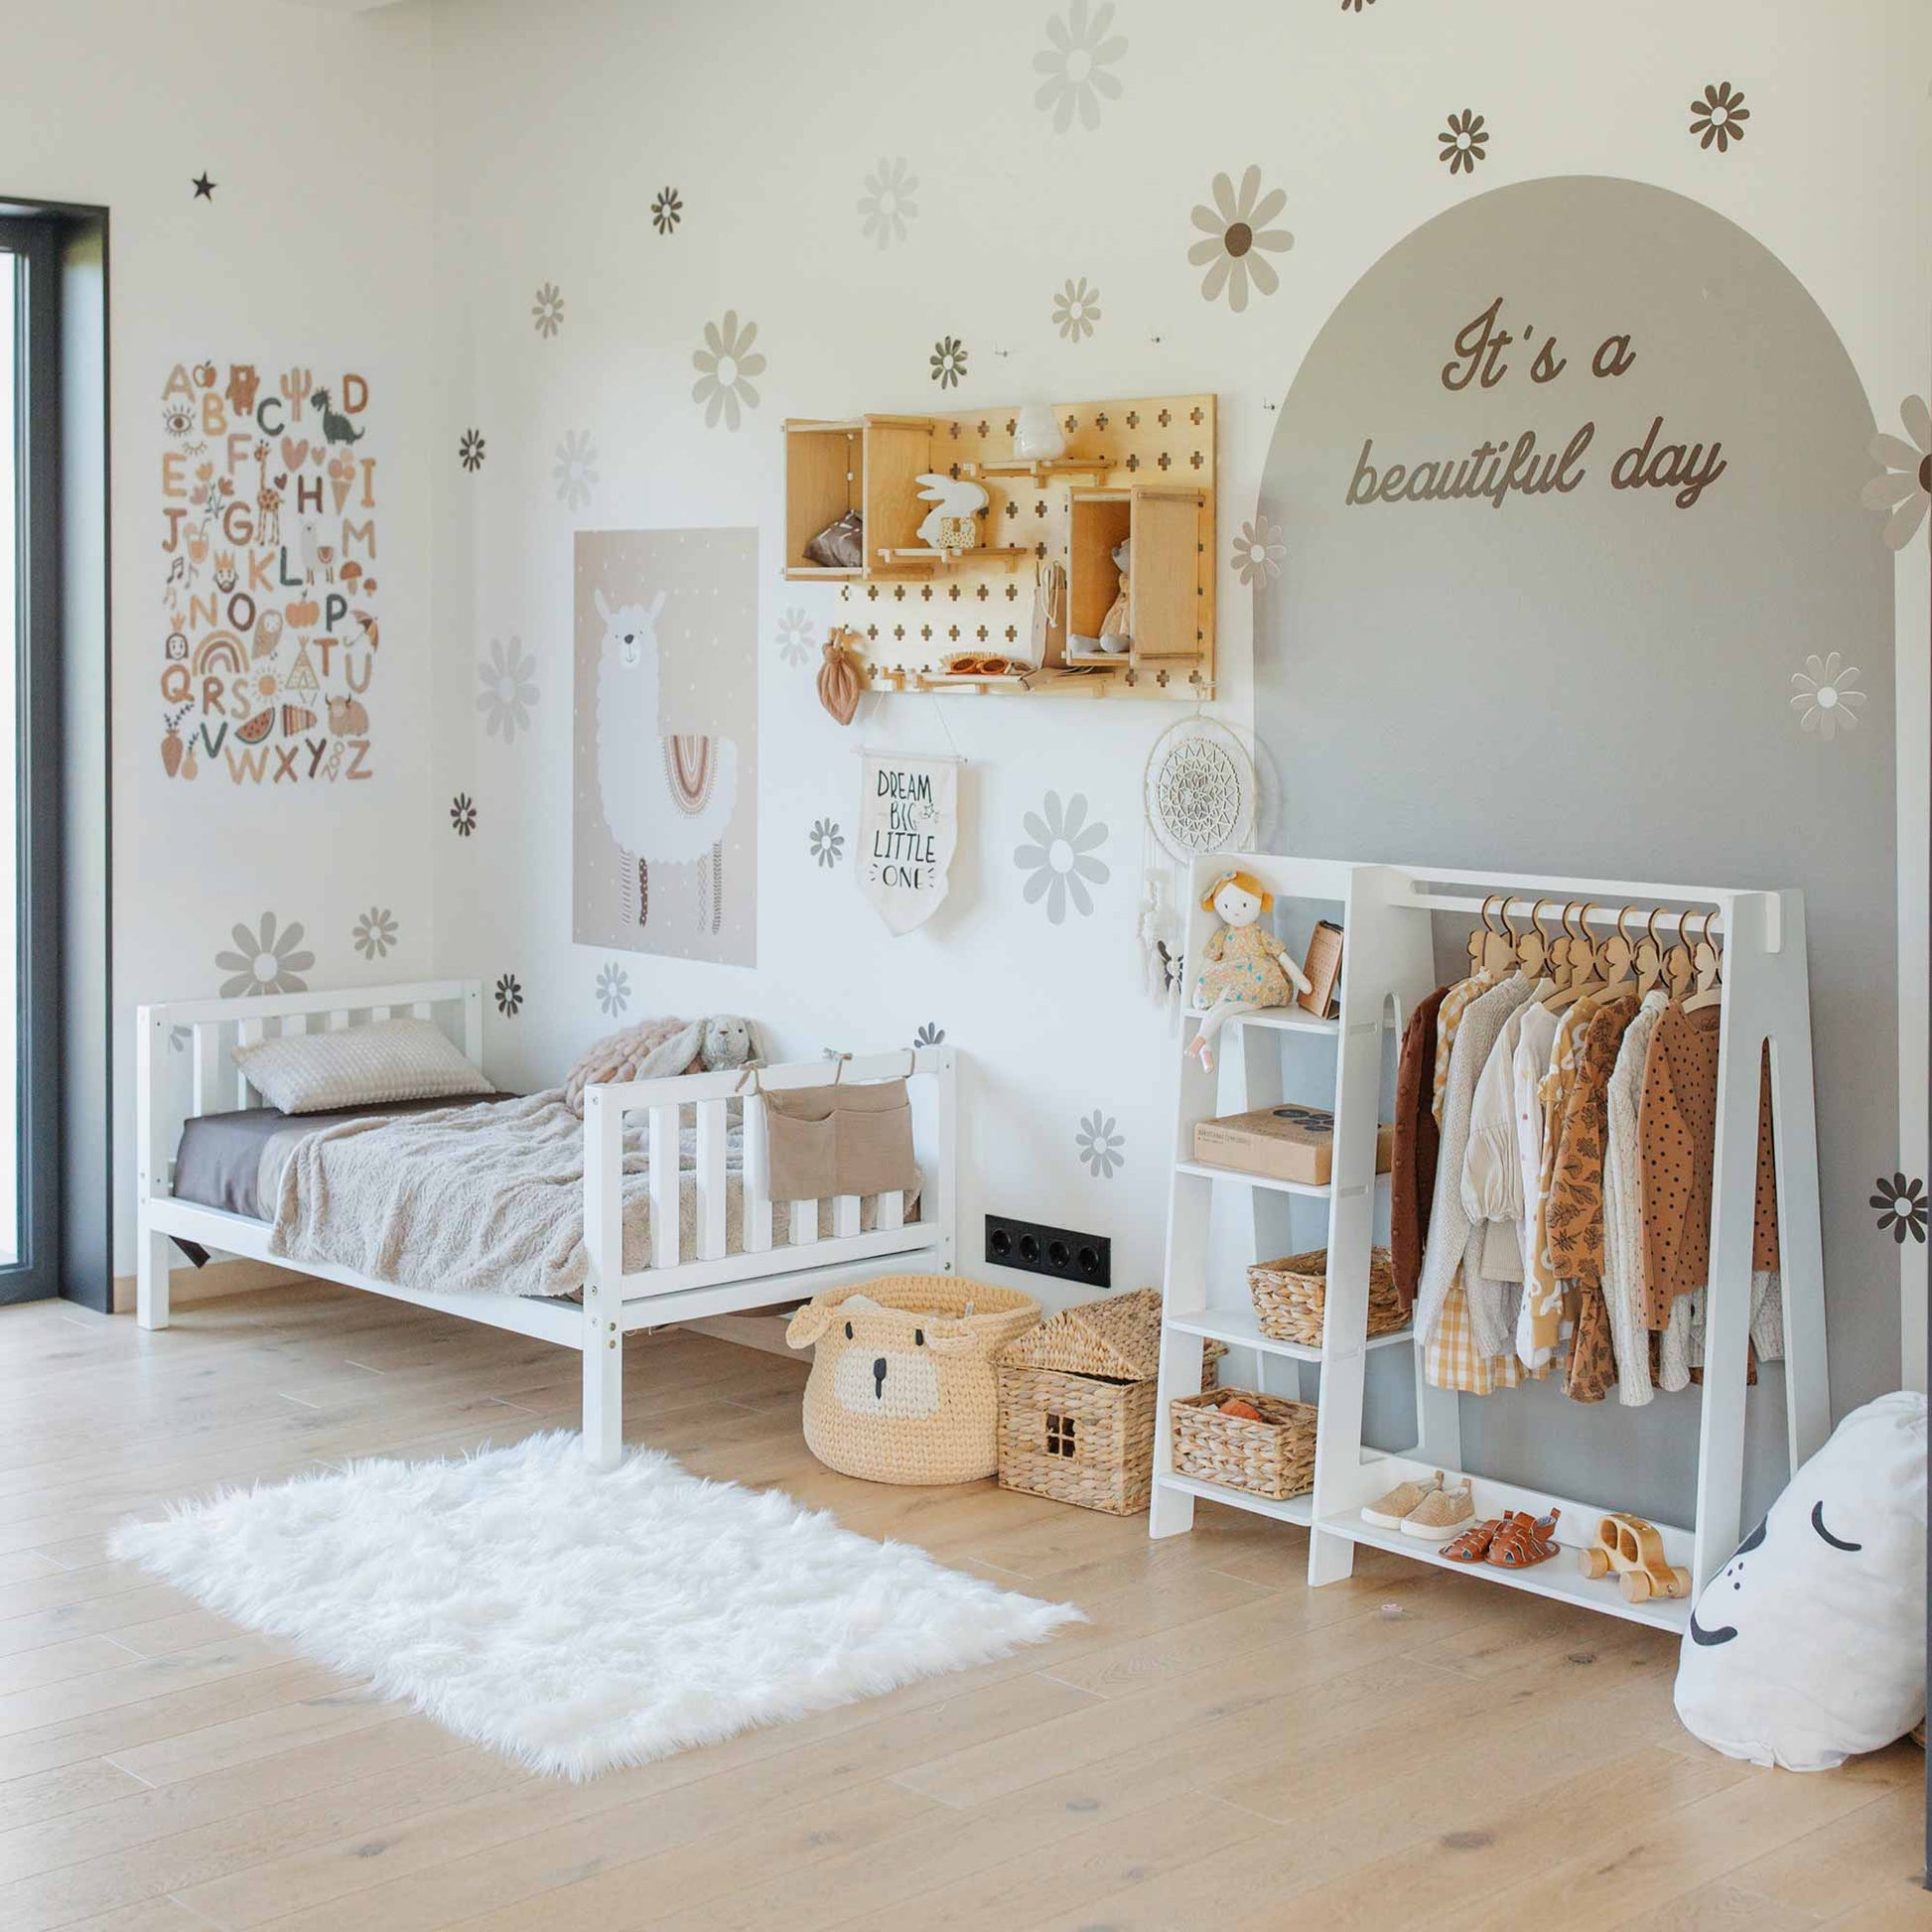 A neatly arranged children's room with a small bed, a Children's wardrobe with a dress-up clothing rack, Montessori-inspired storage shelves, and decorative items including wall art and baskets. The wall features the phrase "It's a beautiful day.